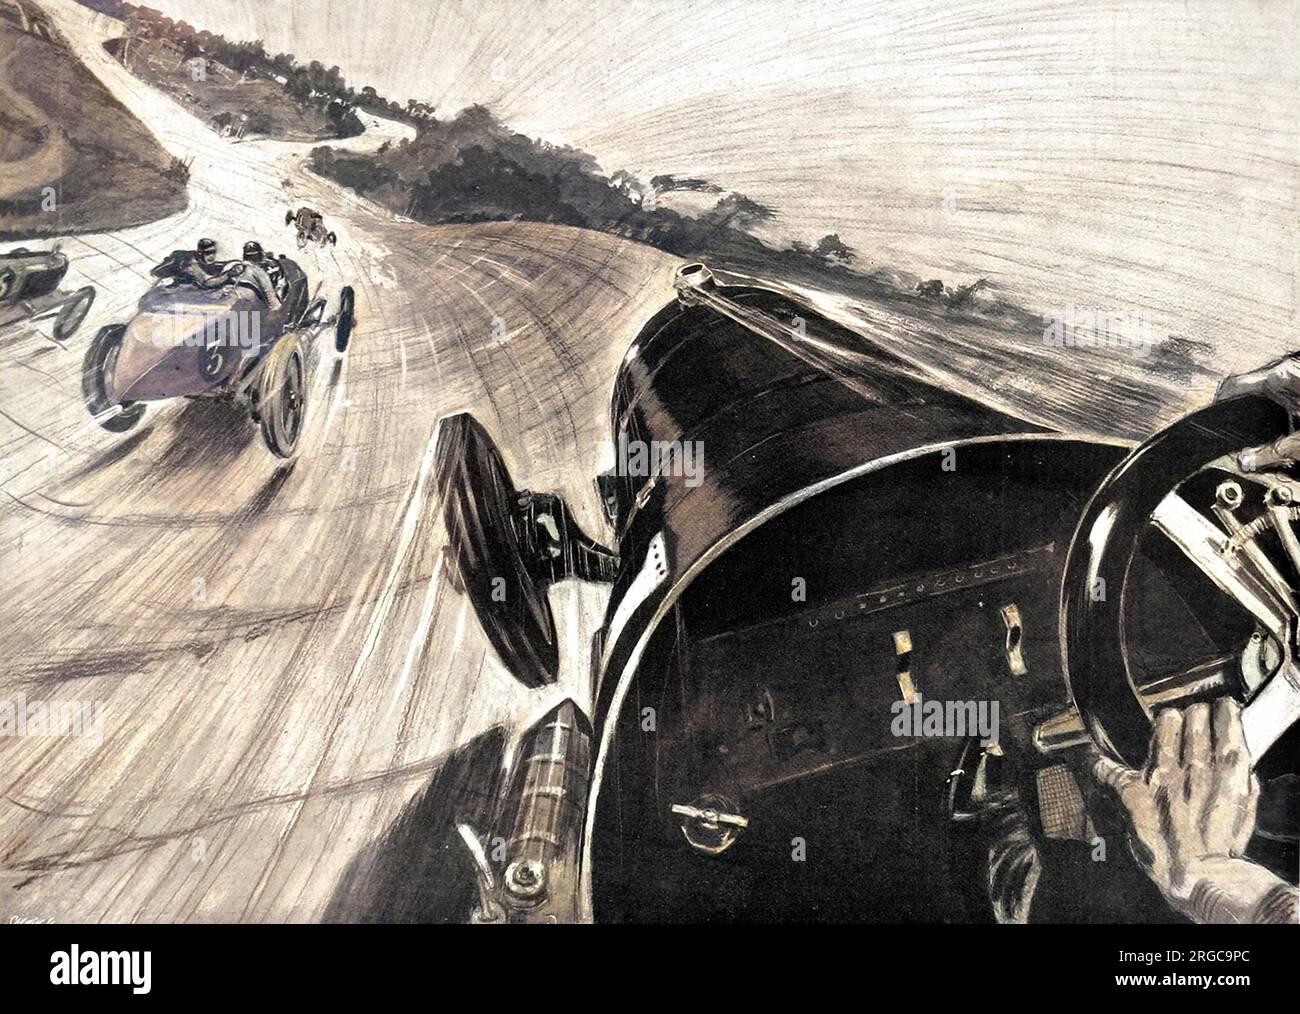 An impression of rounding a banked curve at Brooklands at a speed of 110 miles per hour, from the mechanics seat of a 59.6h.p. Benz, driven by Mr. L. G. Hornsted. Stock Photo